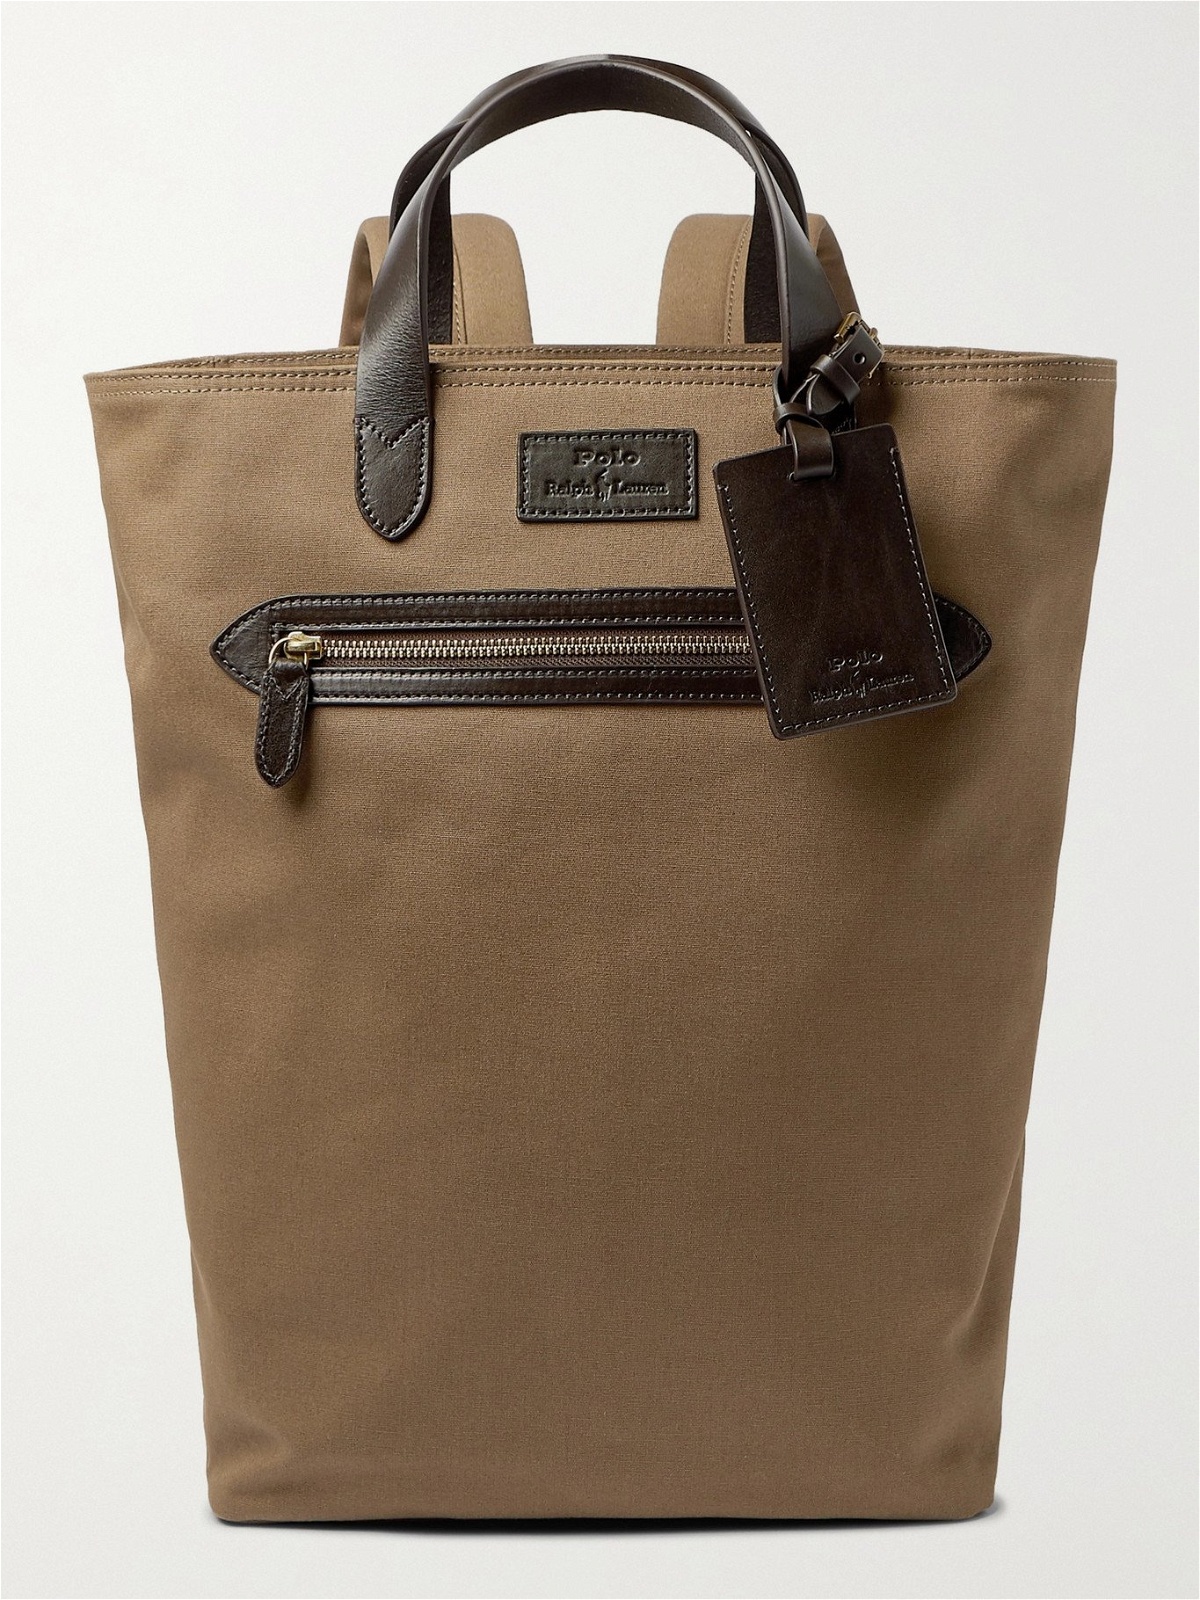 POLO RALPH LAUREN Leather-Trimmed Canvas Tote Bag for Men